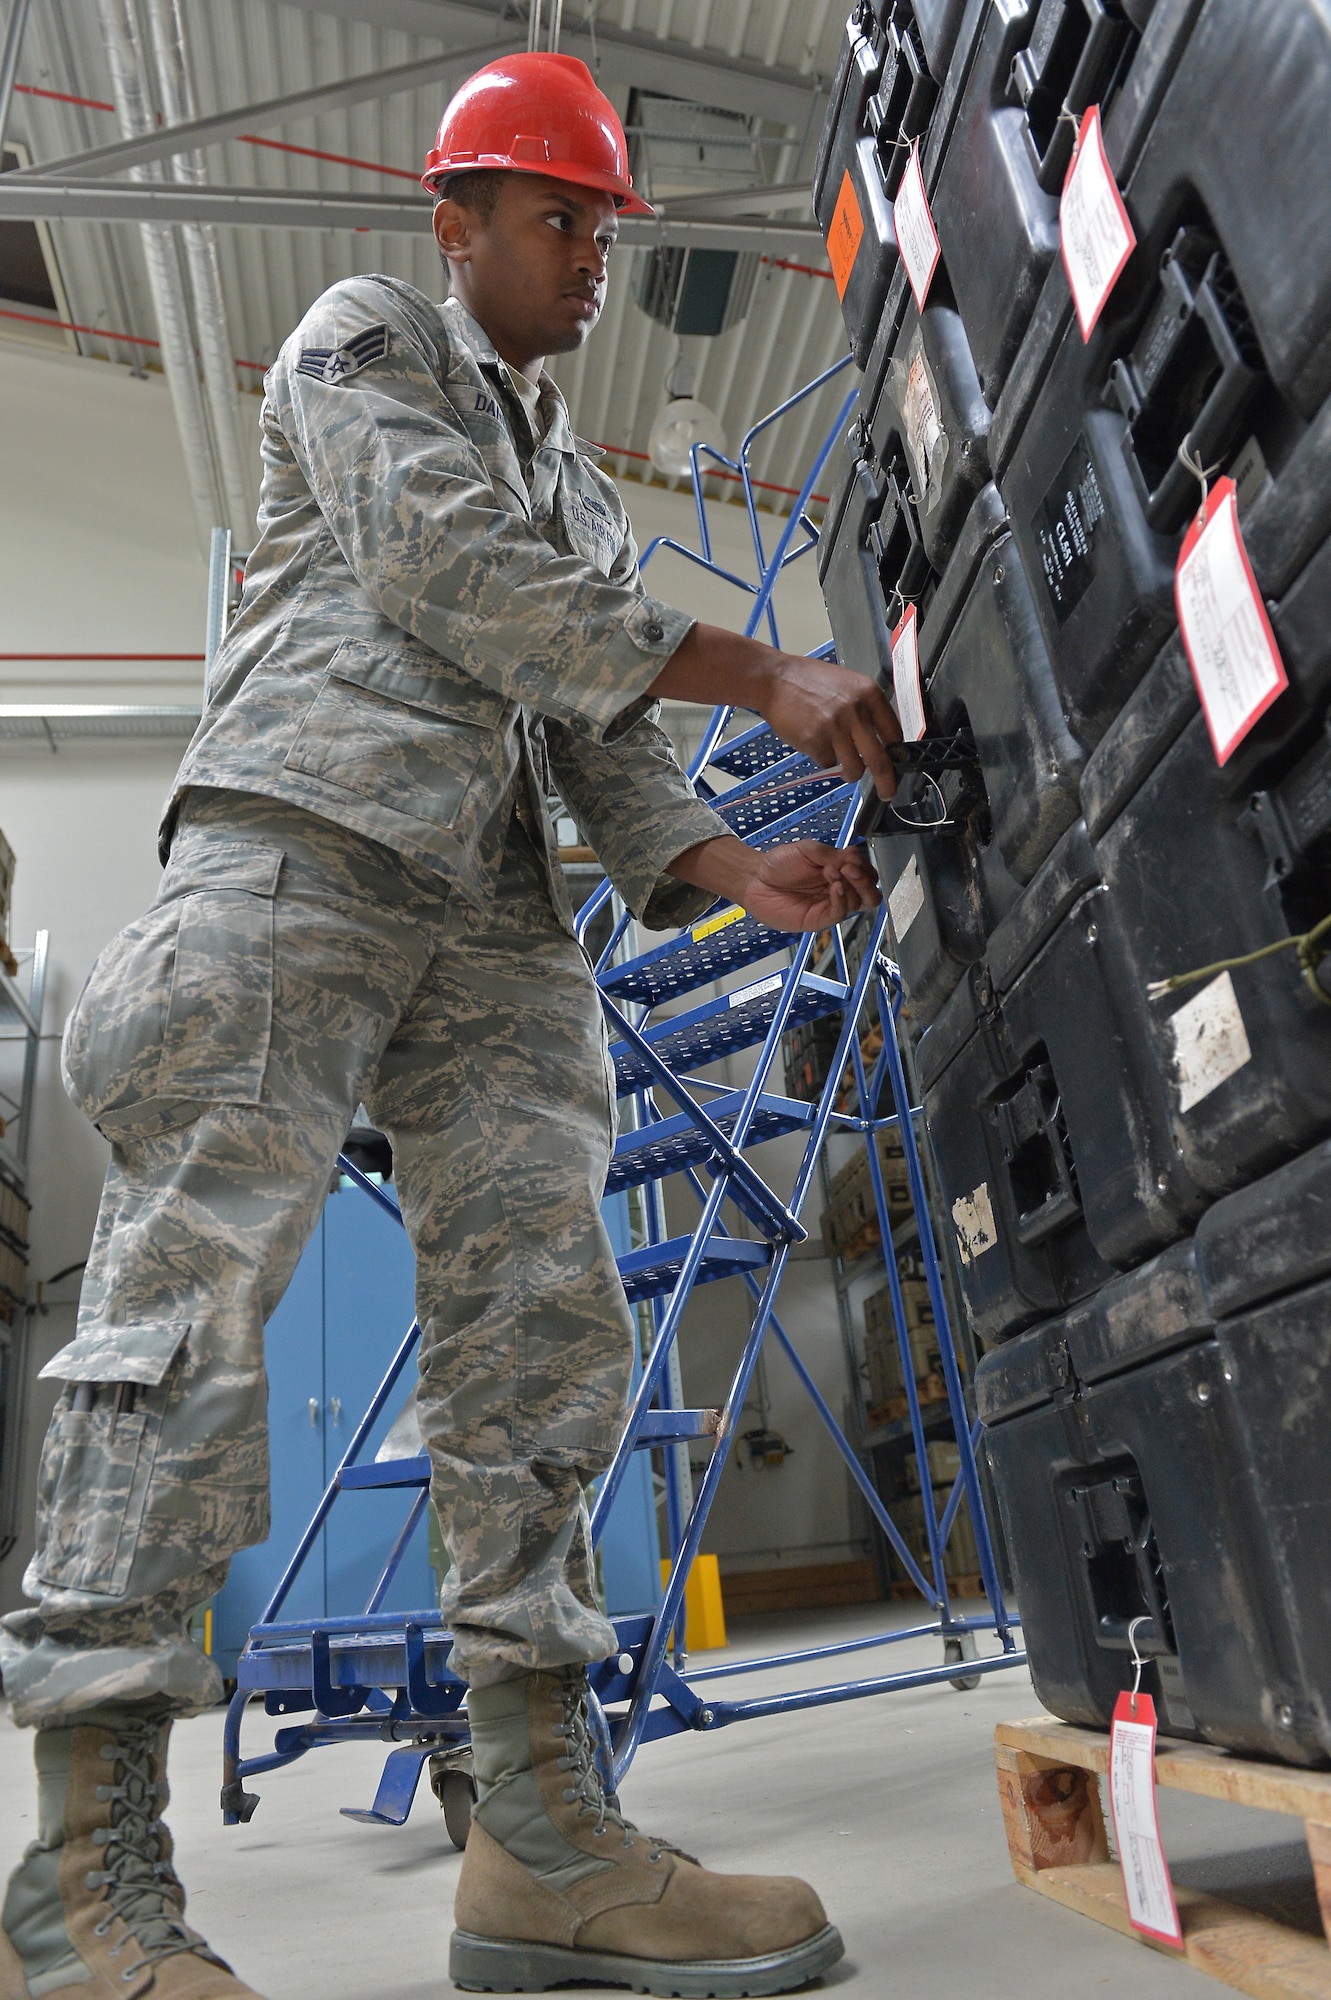 Senior Airman Howard Daniels, 1st Combat Communications Squadron radio frequency transmissions journeyman, tags faulty equipment on Ramstein Air Base, Germany, March 25, 2013. Daniels was recently awarded the Thunderbolt award for his superior achievements and work performance. (U.S. Air Force photo/Airman 1st Class Holly Cook) 